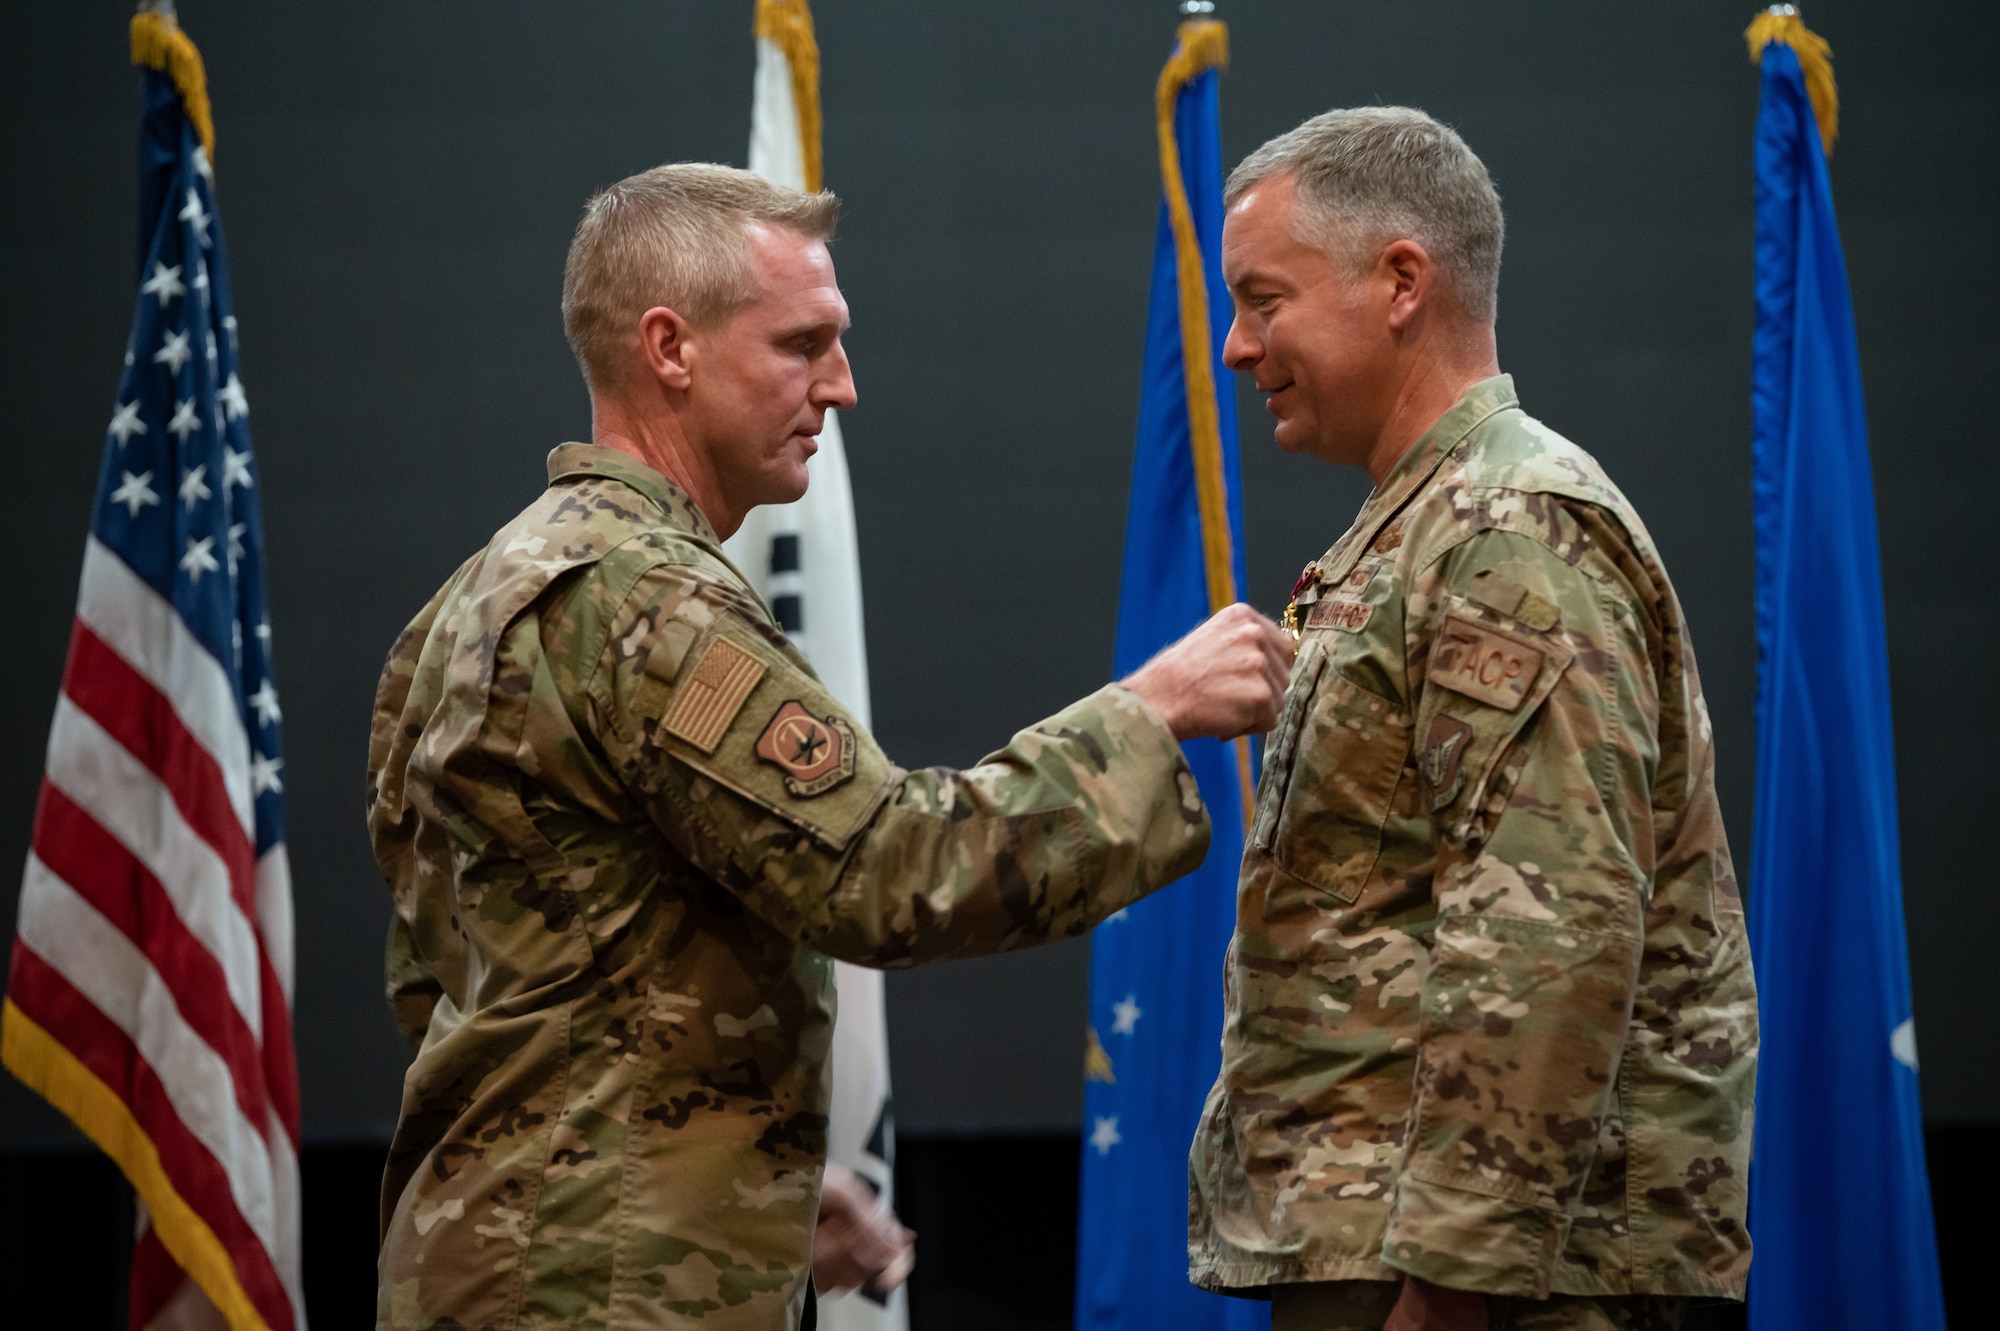 Brig. Gen. Jason Rueschhoff, 7th Air Force deputy commander, pins the Legion of Merit onto Col. Willian Edmunds, 607th Air Support Operations Group outbound commander, at Osan Air Base, Republic of Korea, June 22, 2021. Edmunds earned the Legion of Merit for his meritorious conduct as the 607th ASOG commander. (U.S. Air Force photo by Tech. Sgt. Nicholas Alder)